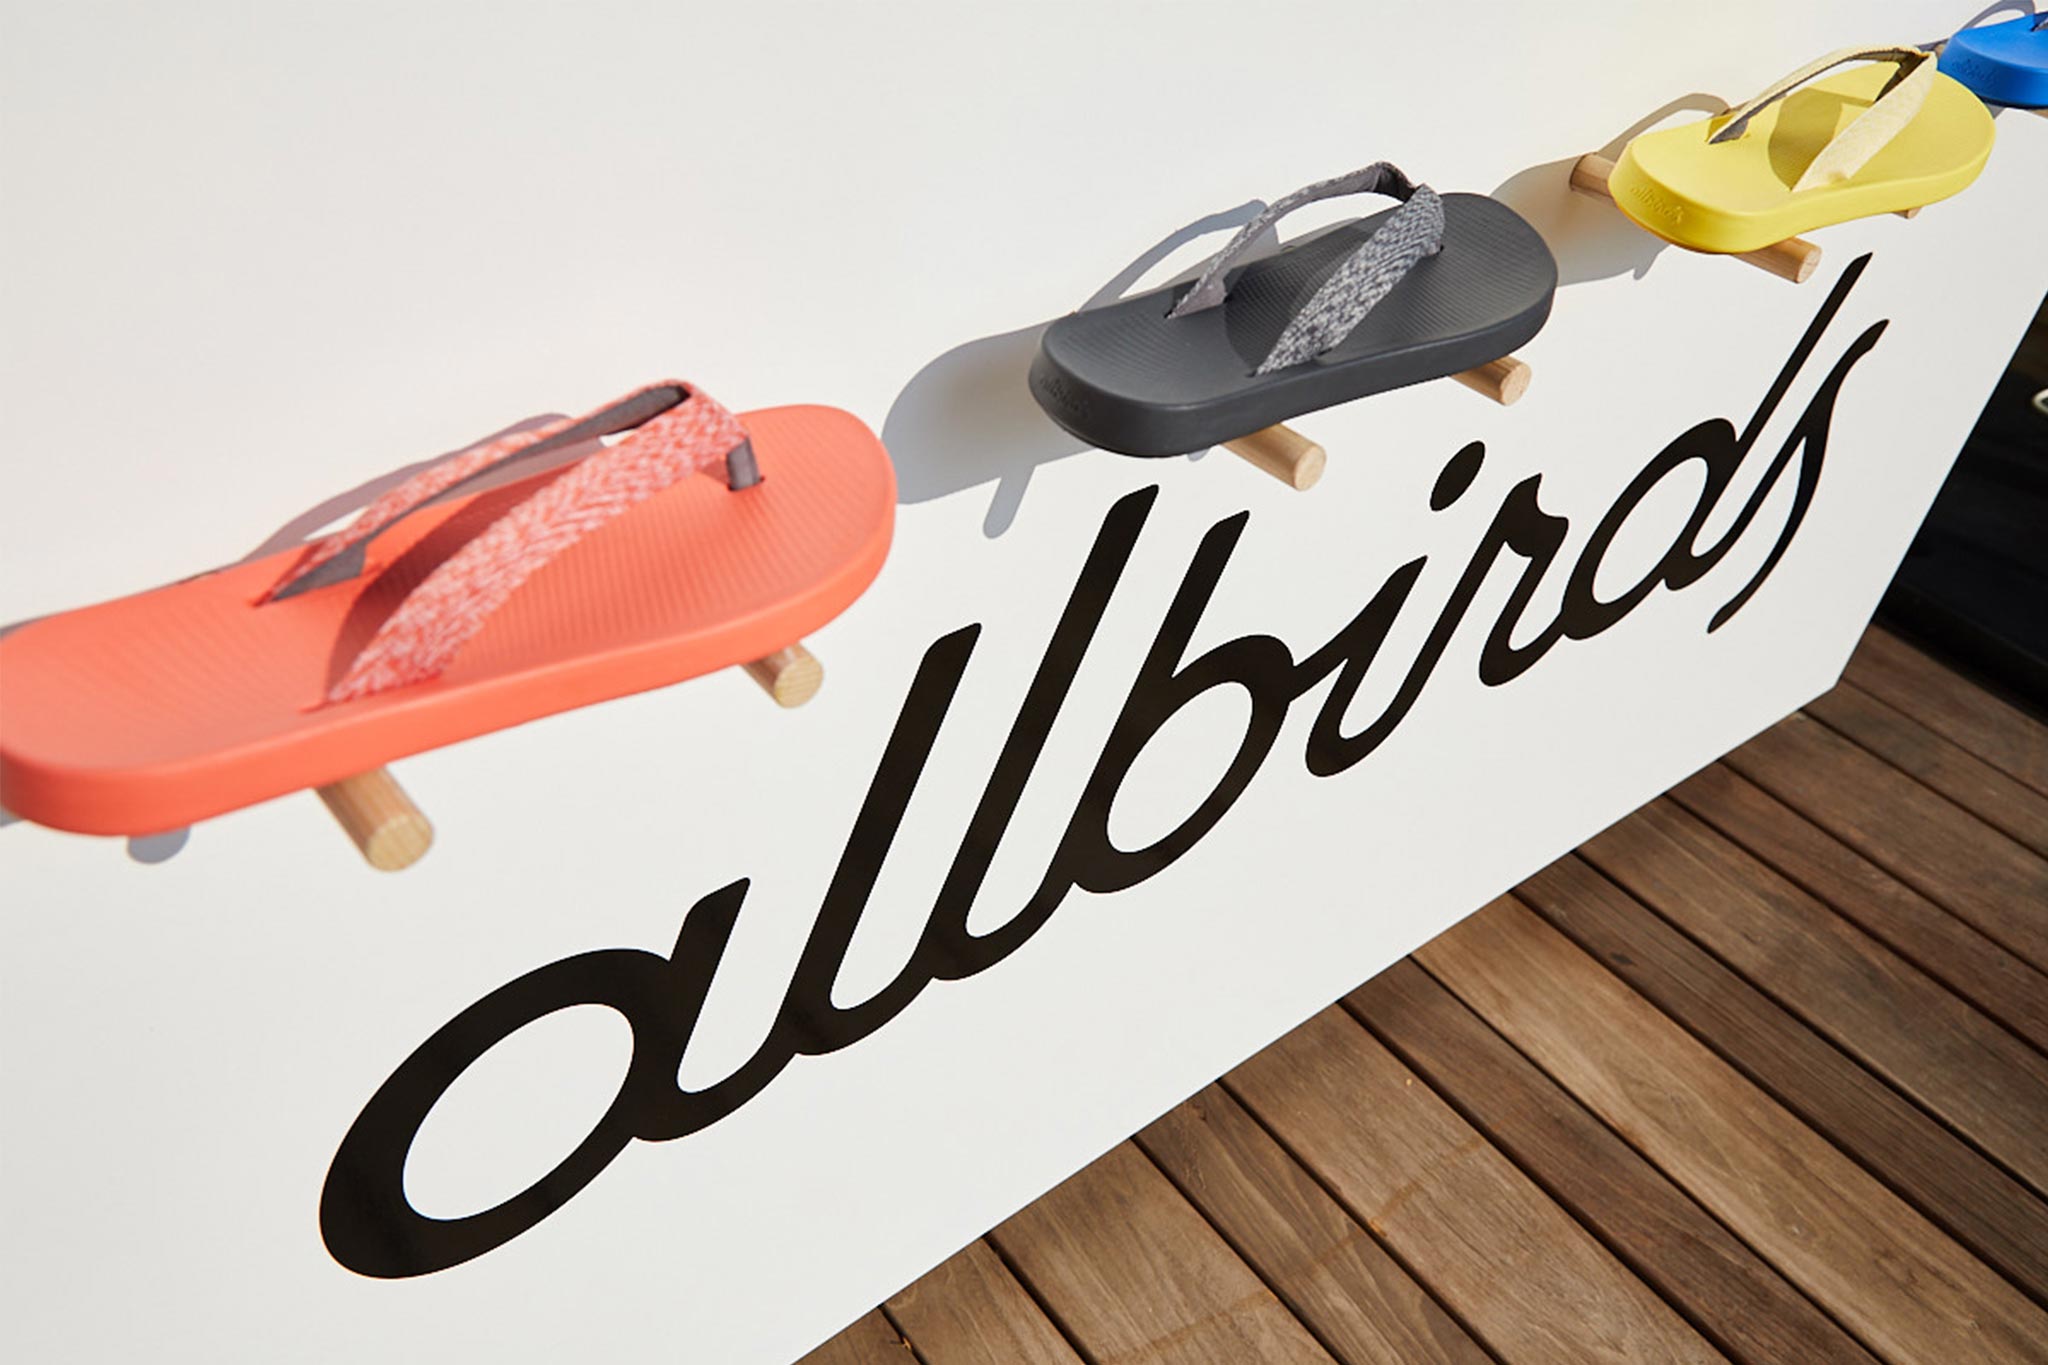 Picture of the custom made bar shelving for the Allbirds event.